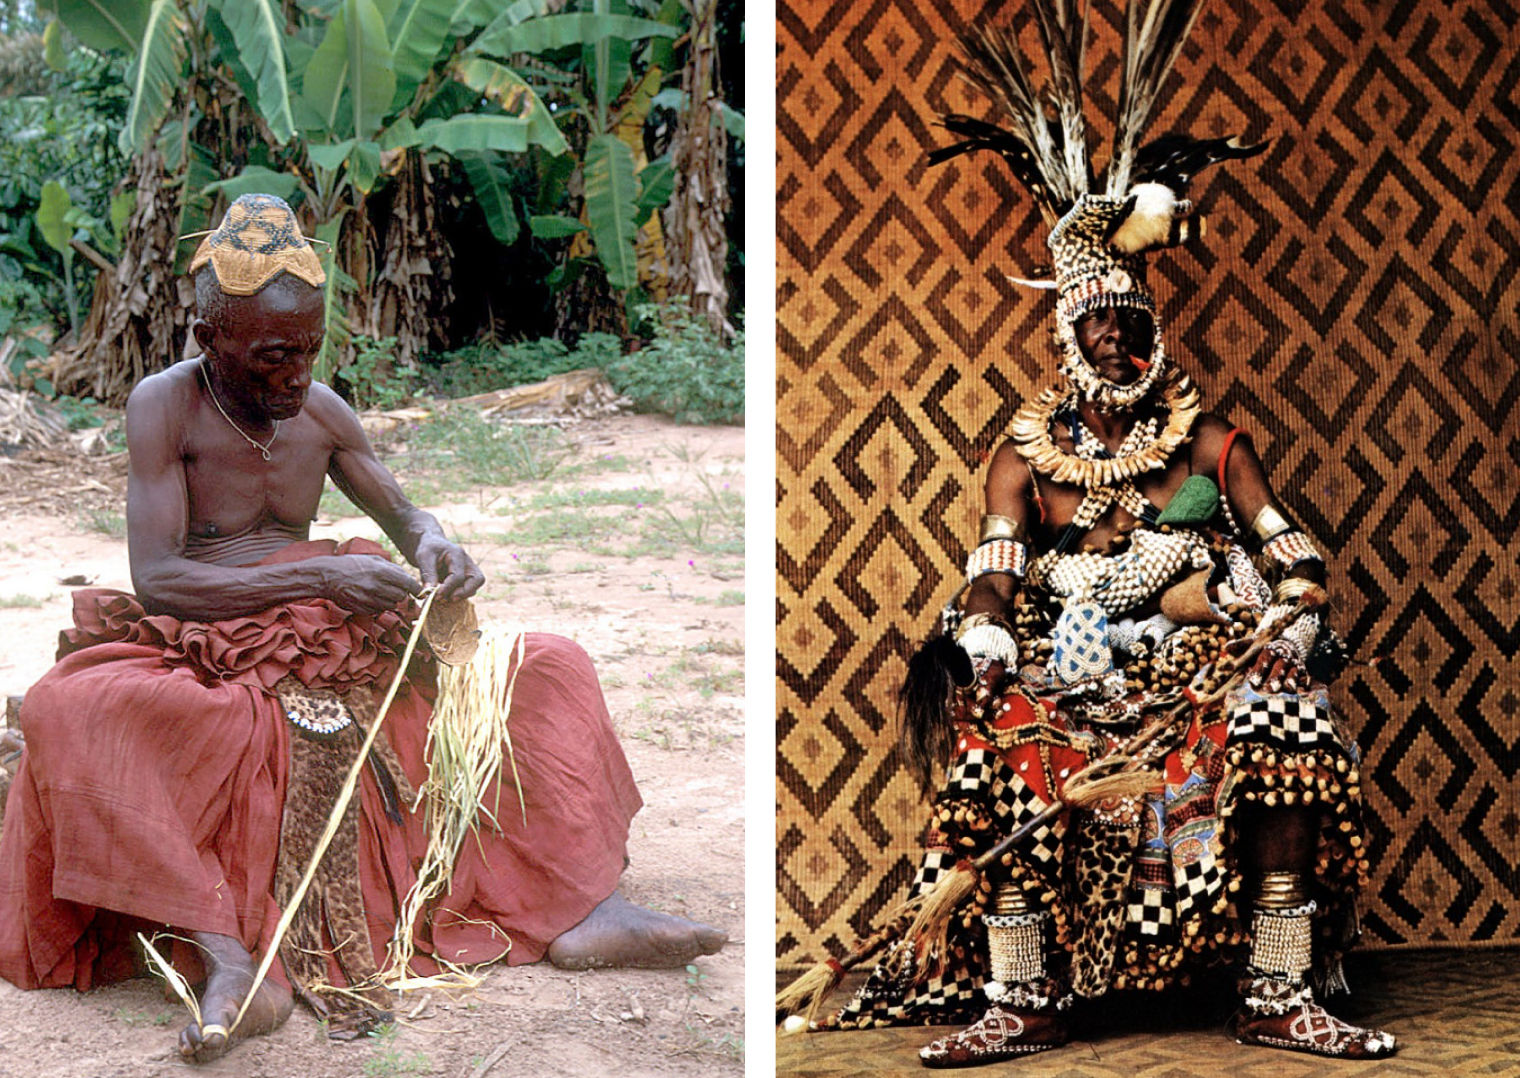 Composite of a man making a hat with natural fibers and a man wearing elaborate royal regalia made with shells, beads and feathers